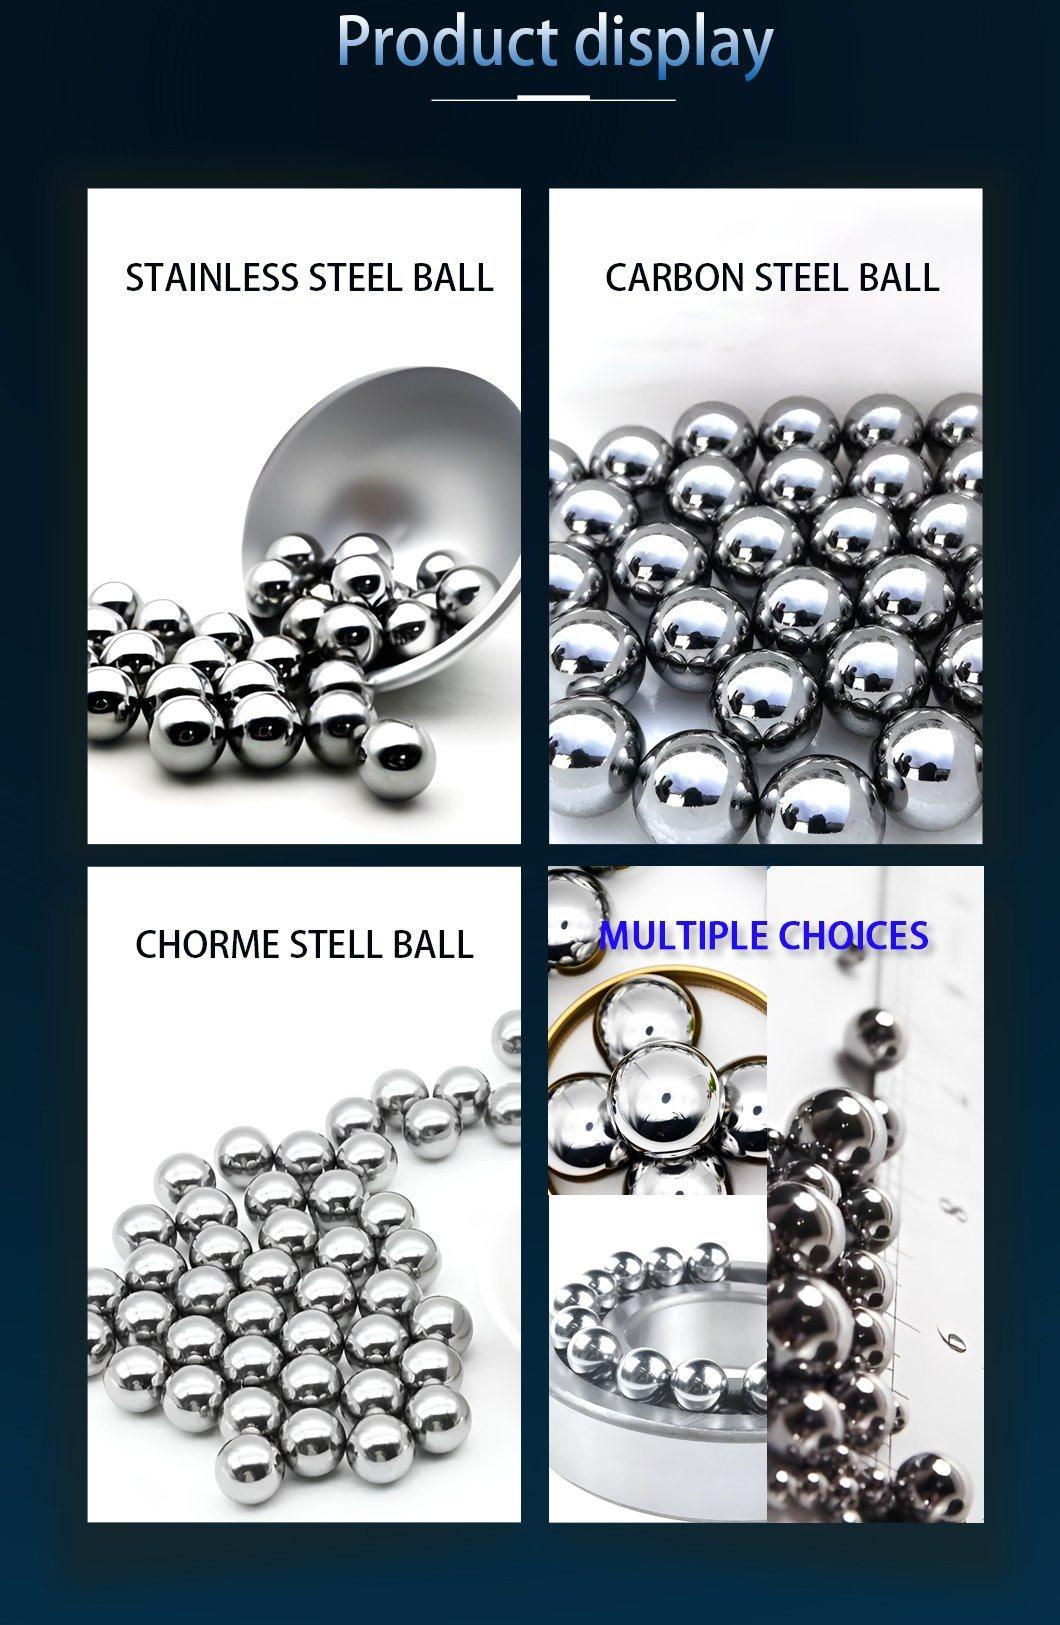 Wholesale AISI 304 Mirror Steel Ball 20mm Small Stainless Steel Solid Metal Ball